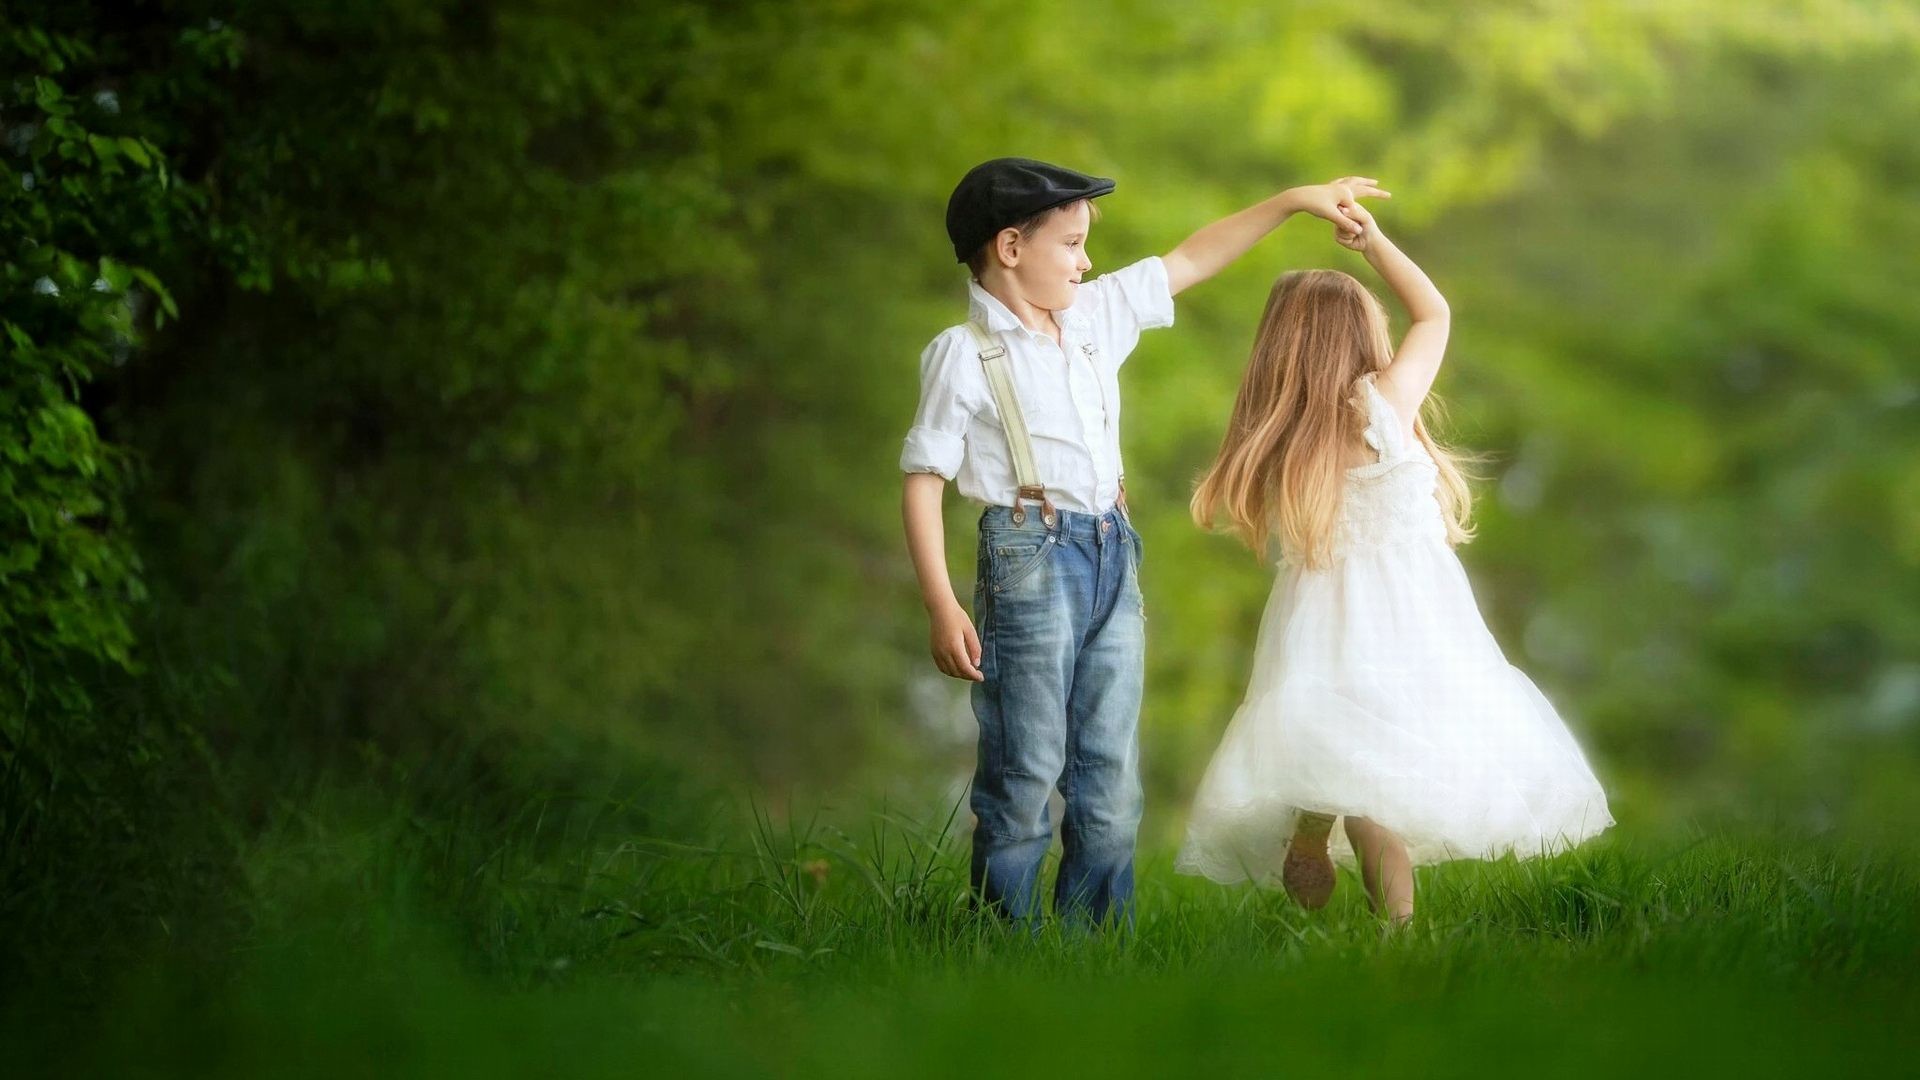 Funny Wallpaper Little Boy And Girl Dancing - Cute Boy And Girl In Love - HD Wallpaper 